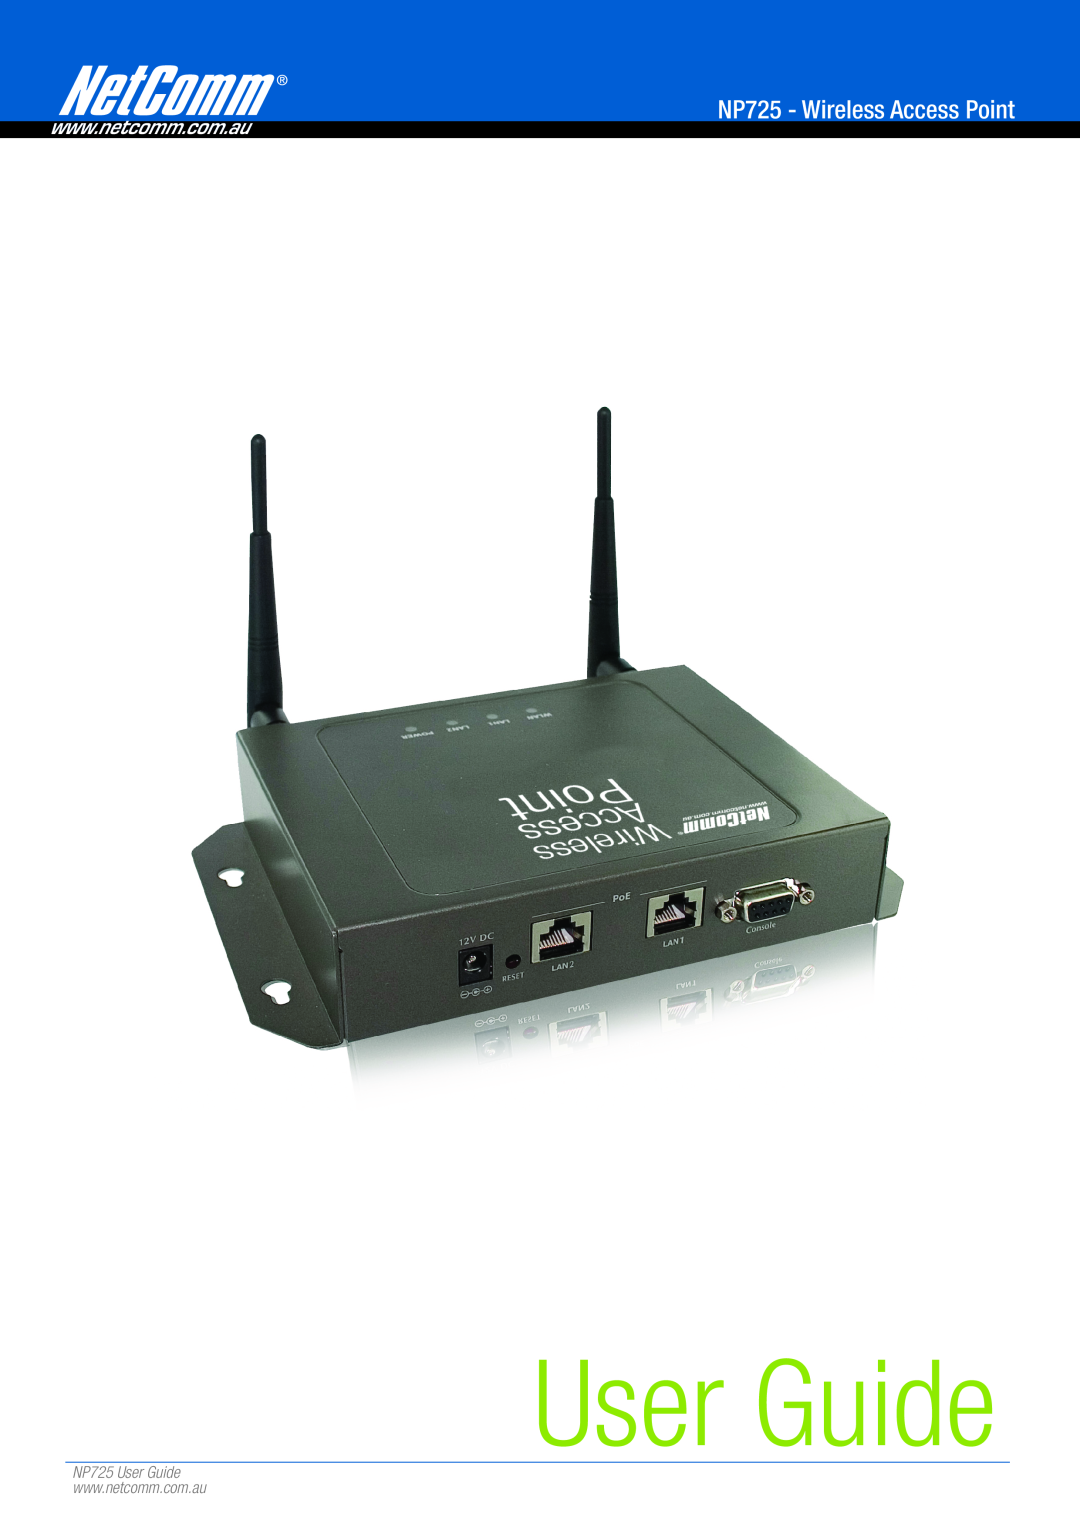 NetComm manual NP725 - Wireless Access Point, NP725 User Guide 